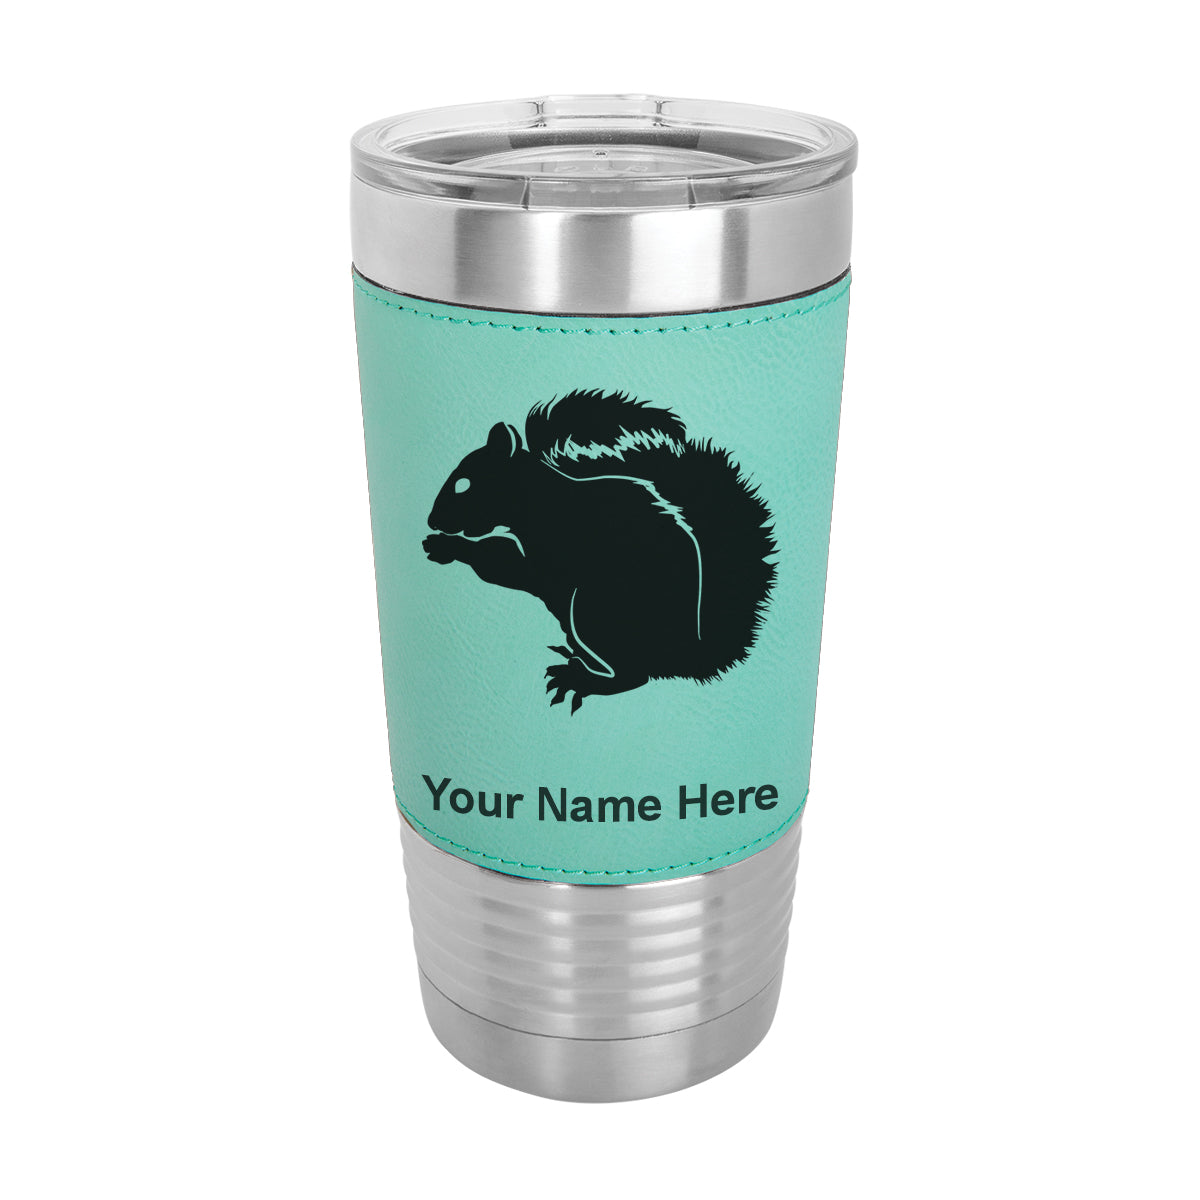 20oz Faux Leather Tumbler Mug, Squirrel, Personalized Engraving Included